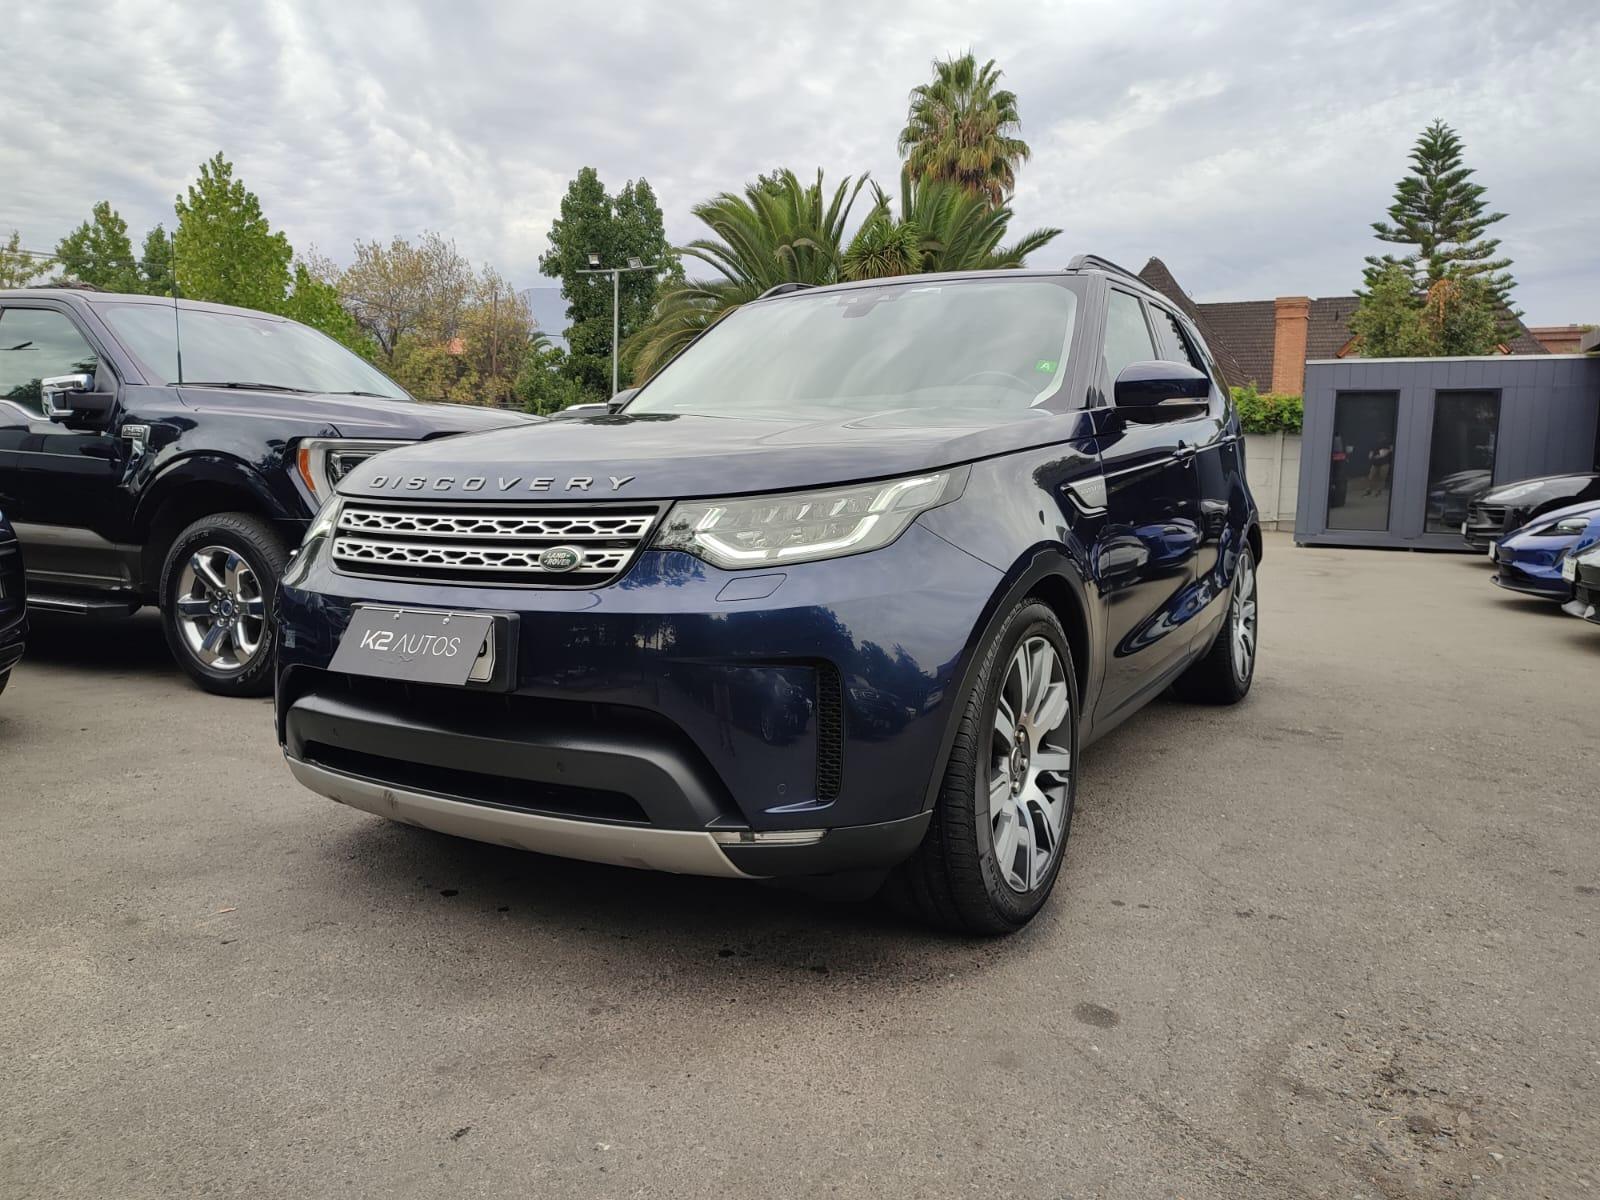 LAND ROVER DISCOVERY 5 HSE SDV6 3.0 4WD 2018 FULL EQUIPO, IMPECABLE - K2 AUTOS